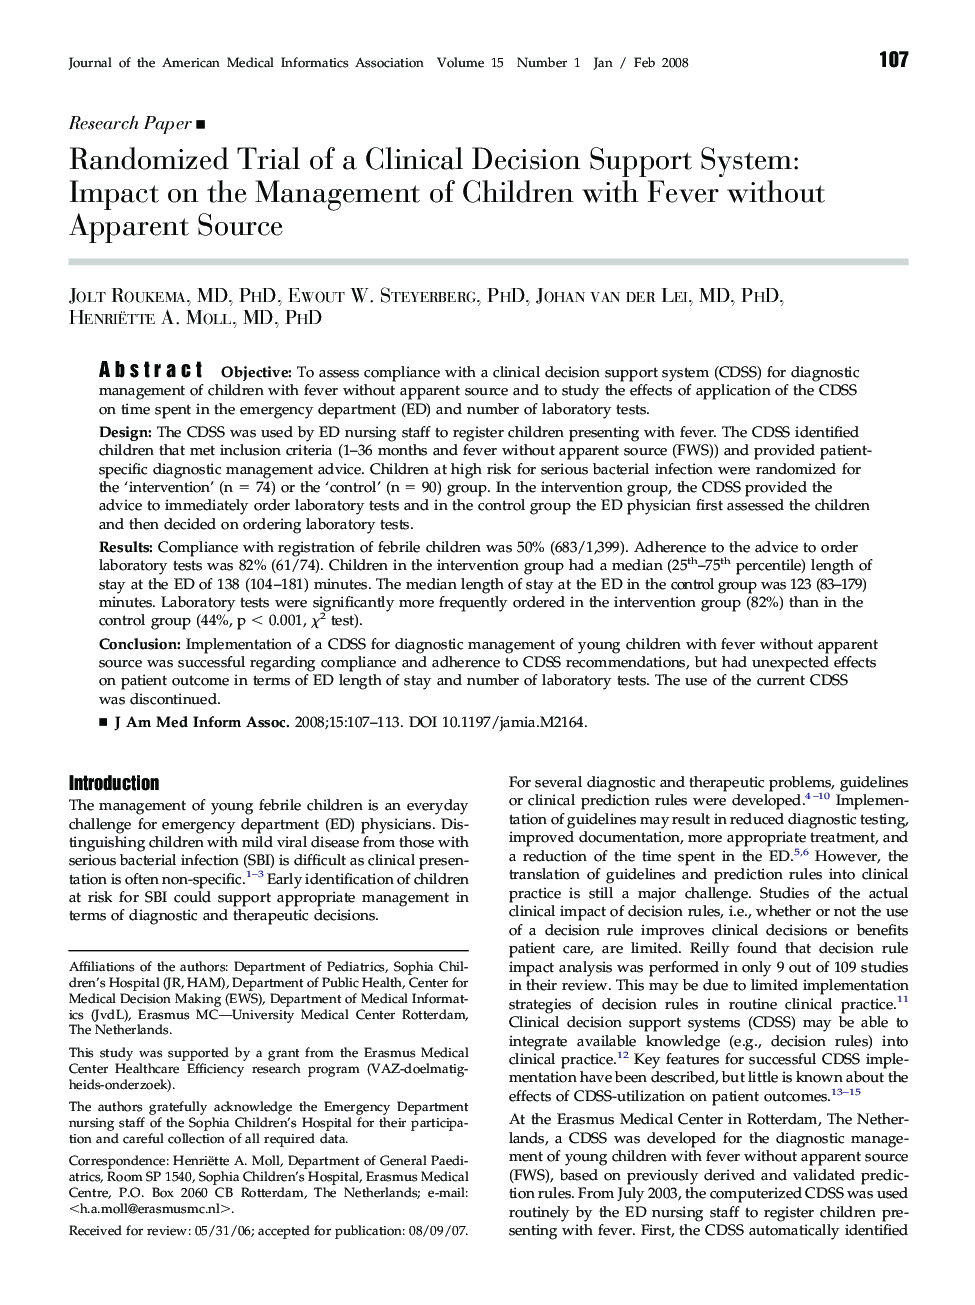 Randomized Trial of a Clinical Decision Support System: Impact on the Management of Children with Fever without Apparent Source 